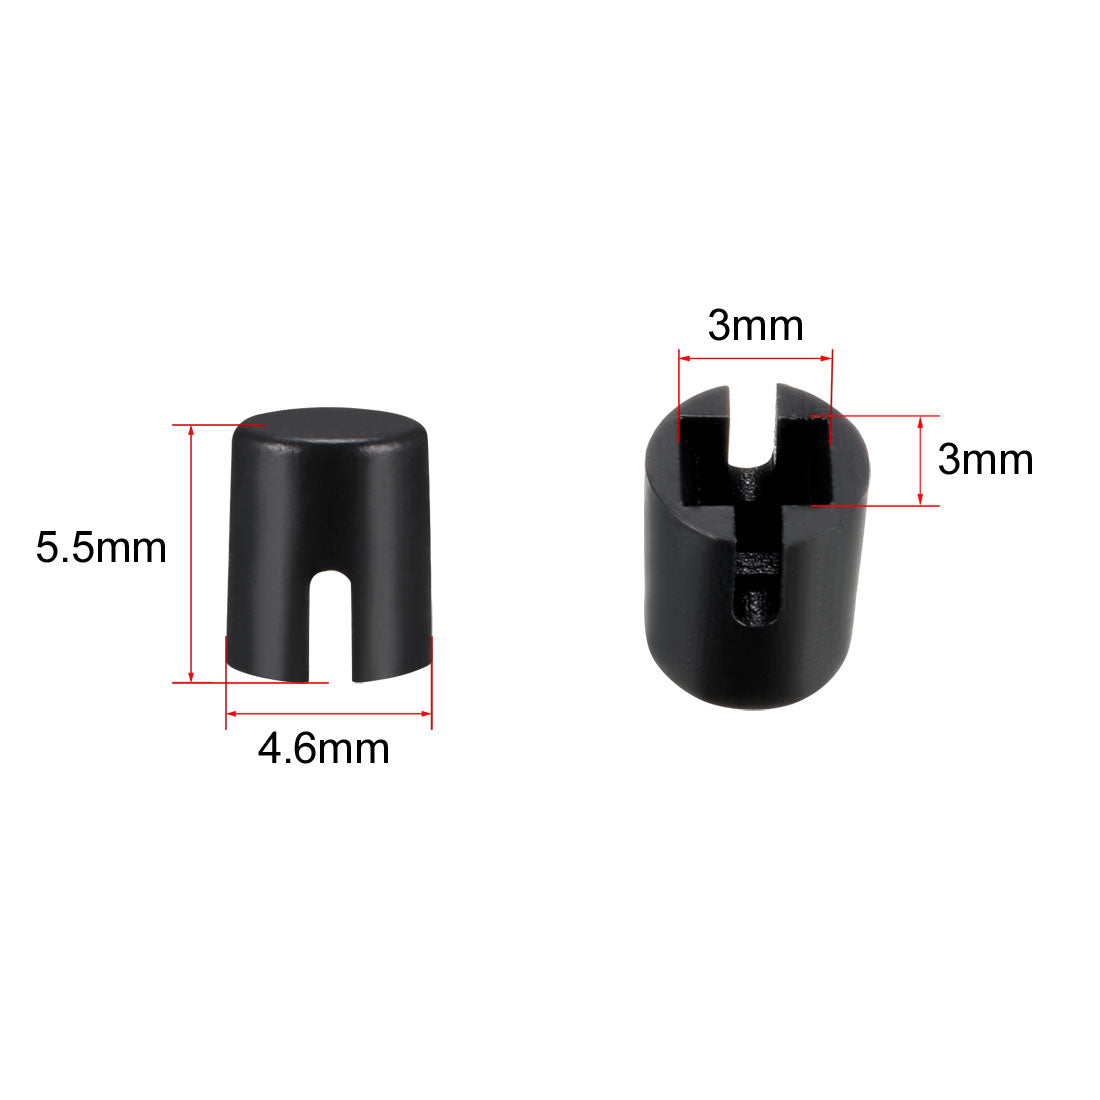 uxcell Uxcell 50Pcs Plastic 4.6x5.5mm Push Button Tactile Switch Caps Cover Keycaps Black for 6x6x7.3mm Tact Switch